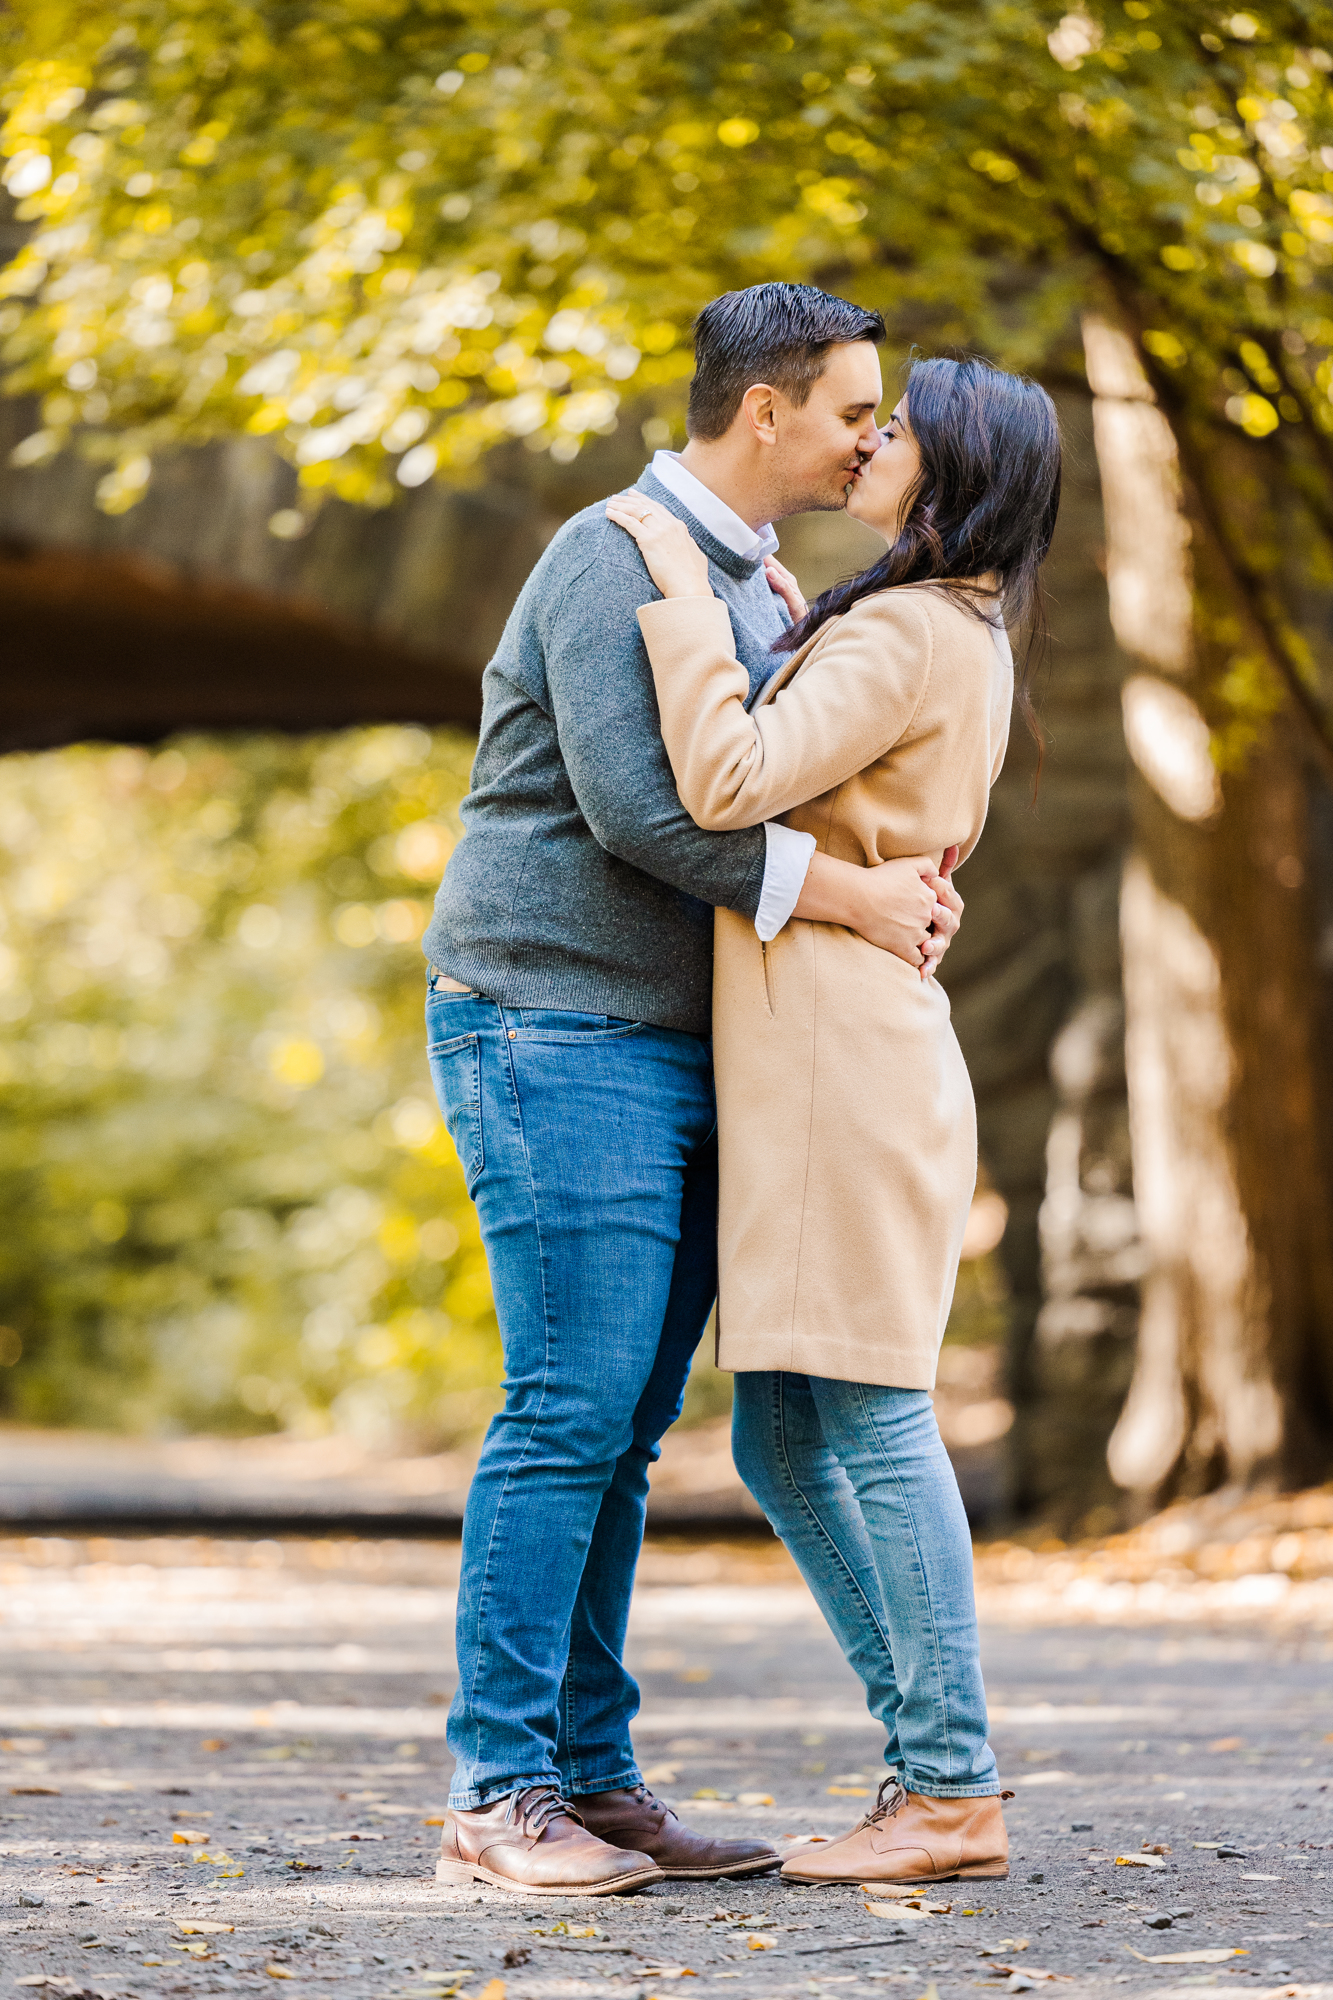 Beautiful Upper West Side Engagement Photo Shoot in NYC